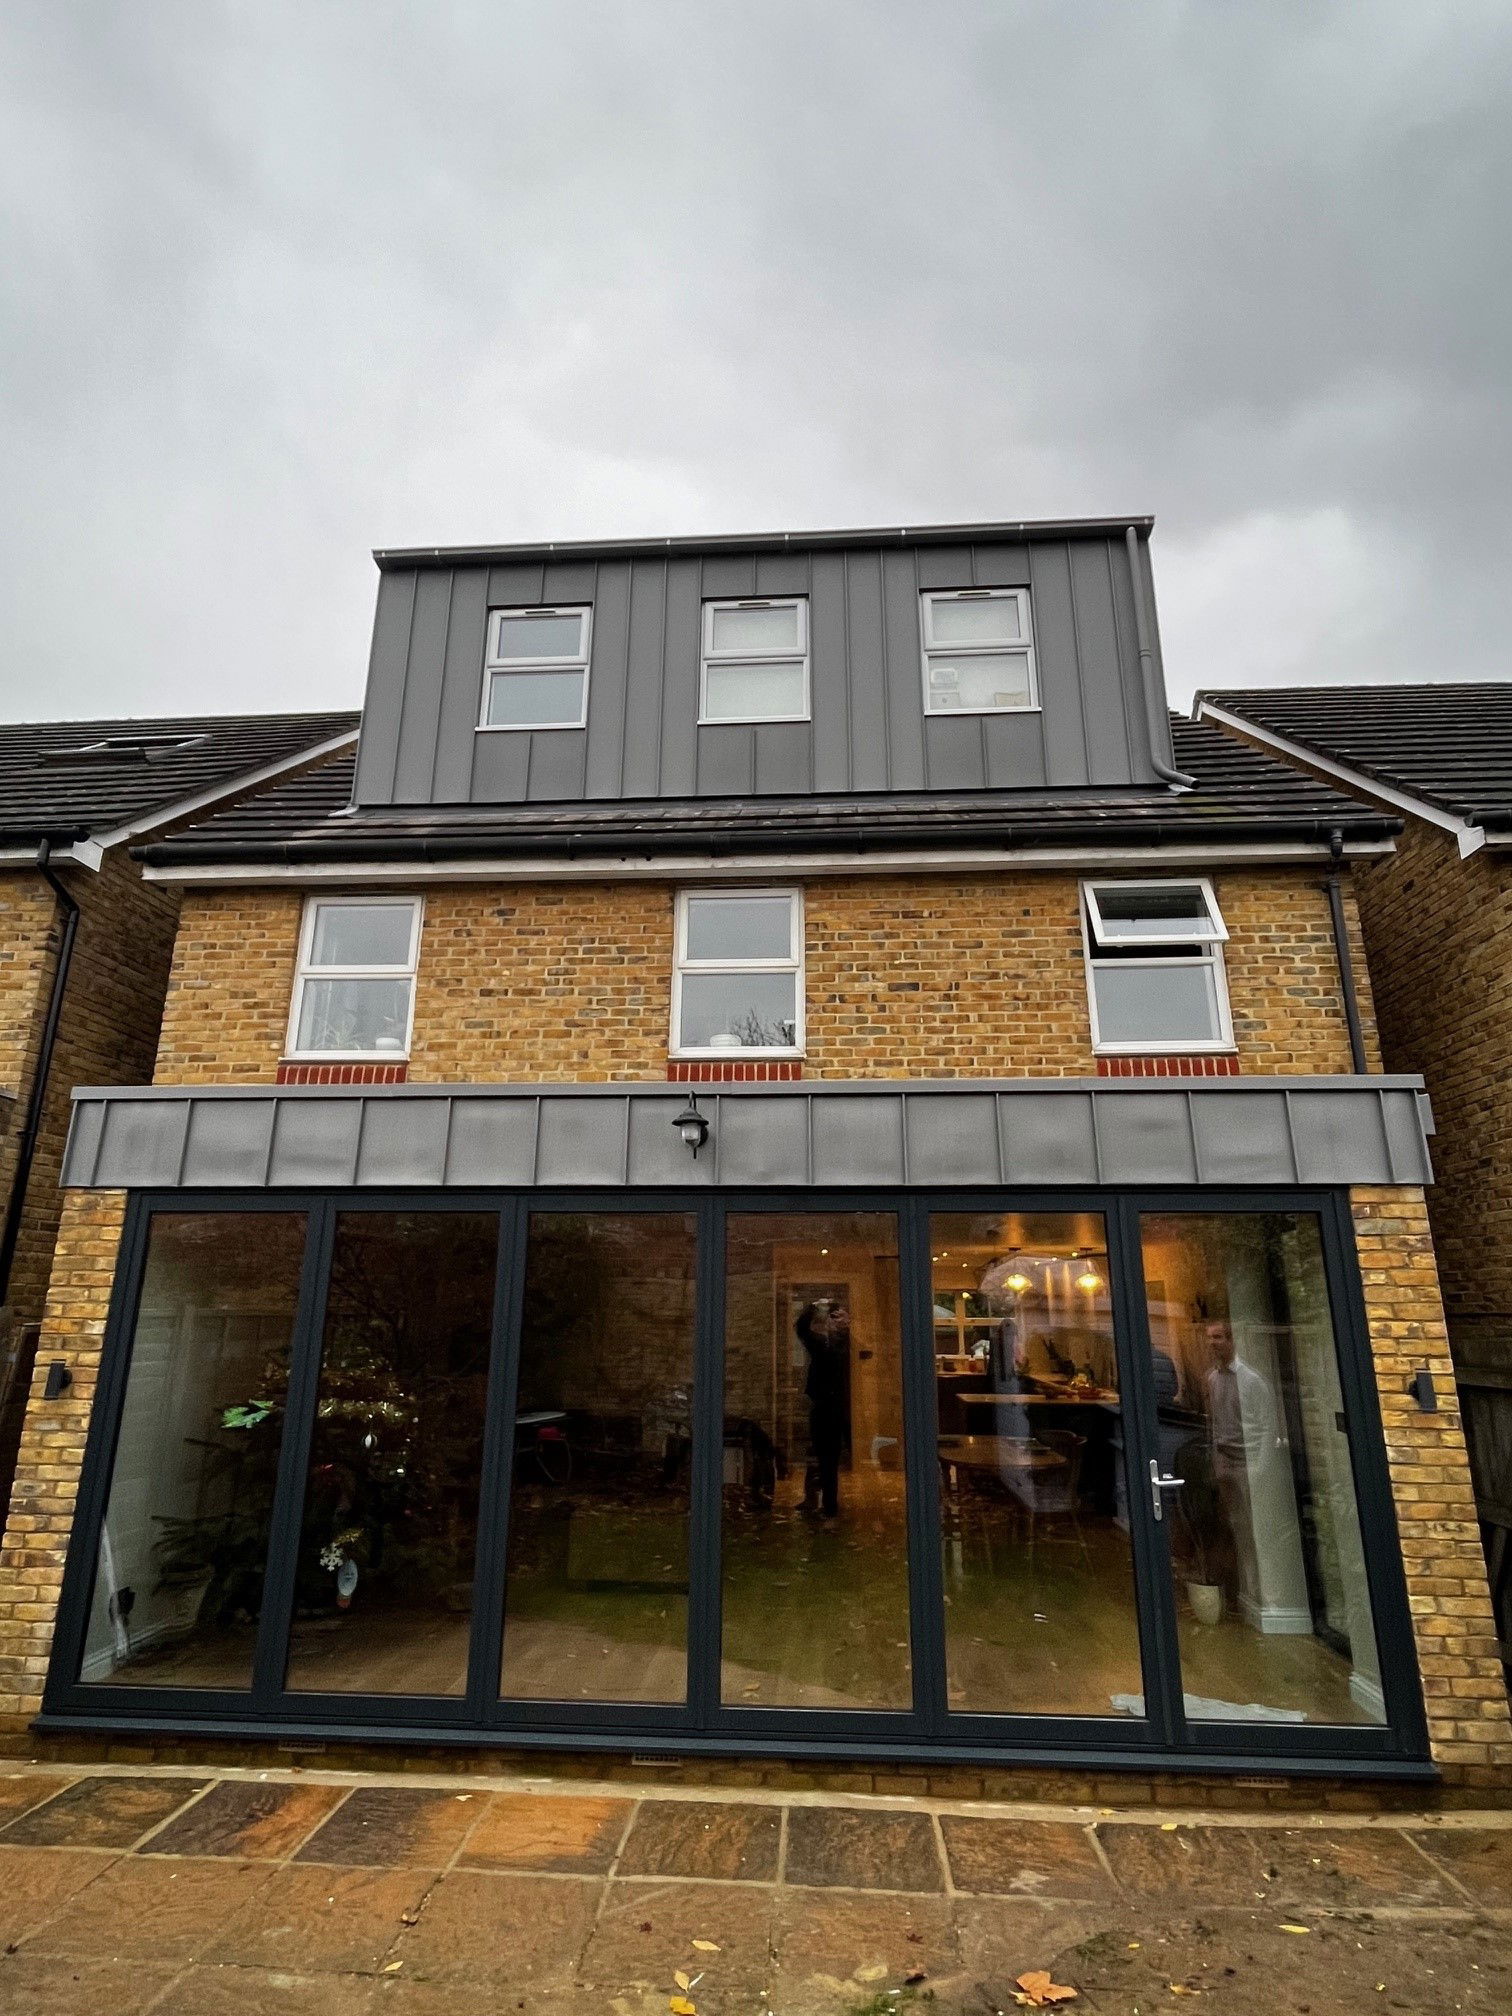 Wandsworth rear kitchen extension on this modern mews property with zinc cladding to match the existing loftloft